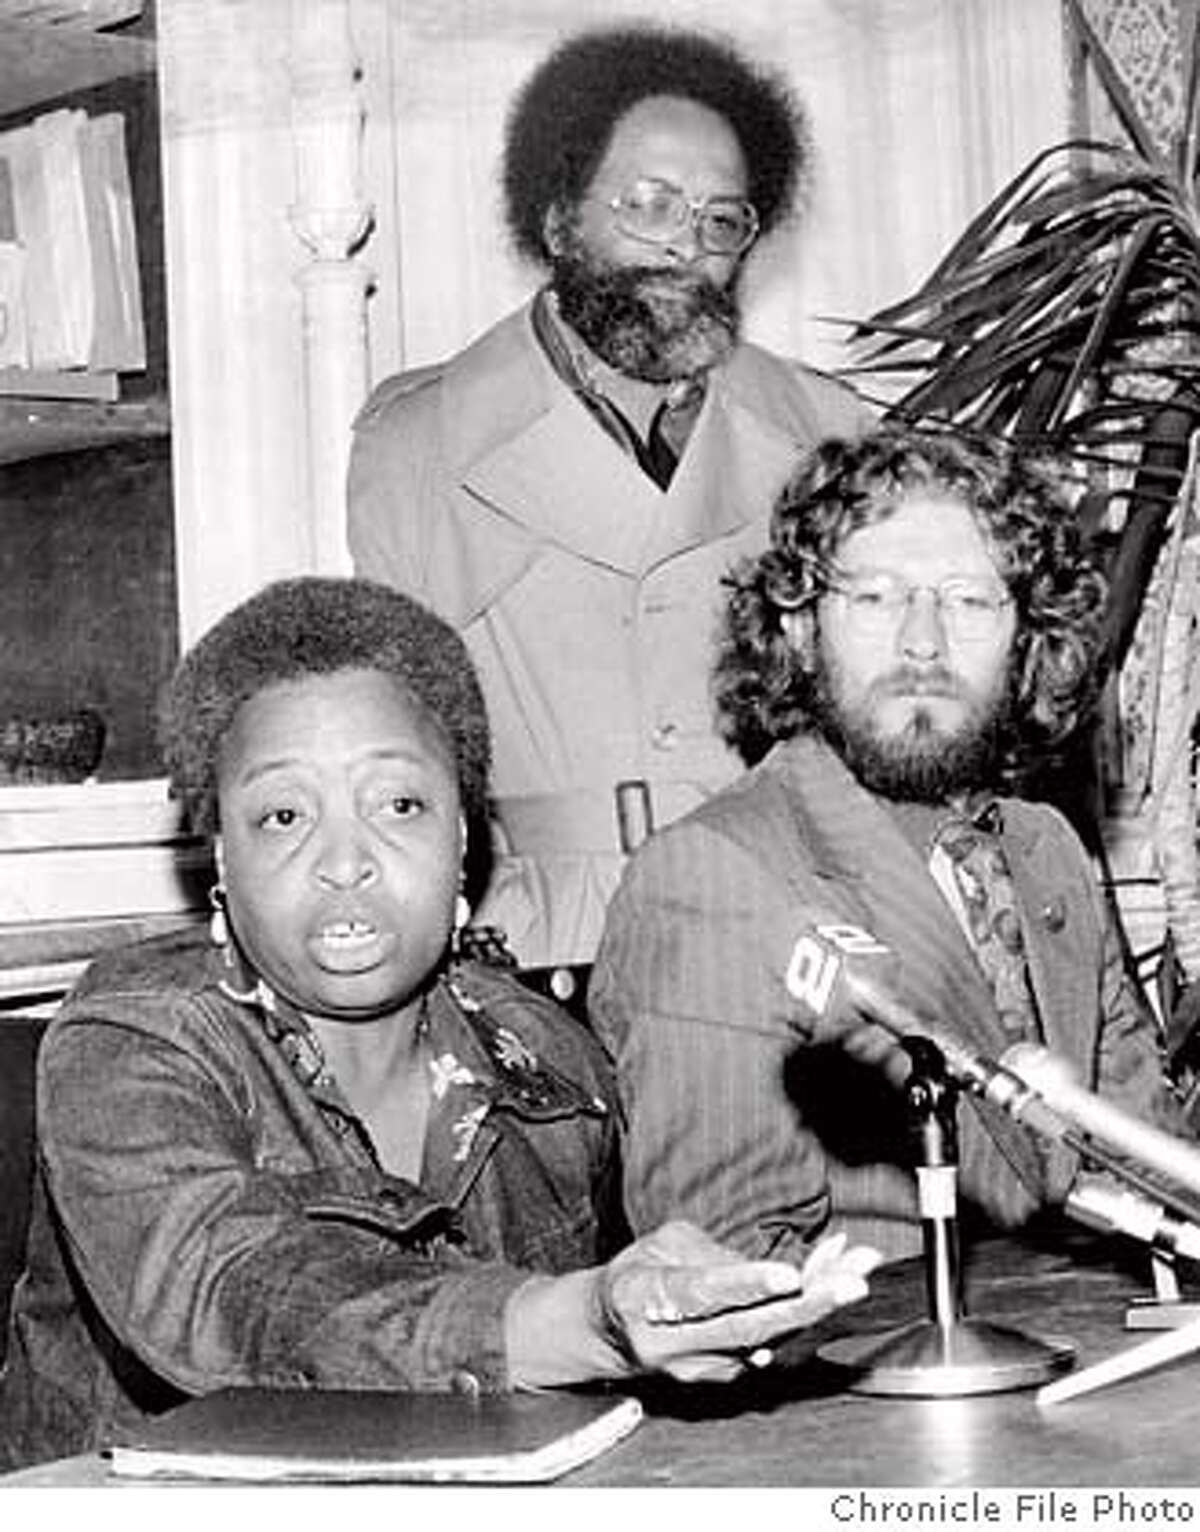 SCARLETT-GOLDEN09_PH1.jpg Yvonne Scarlett-Golden with Terence Hallinan and Rev. Cecil Williams in 1974. San Francisco Chronicle File Photo/ 1974